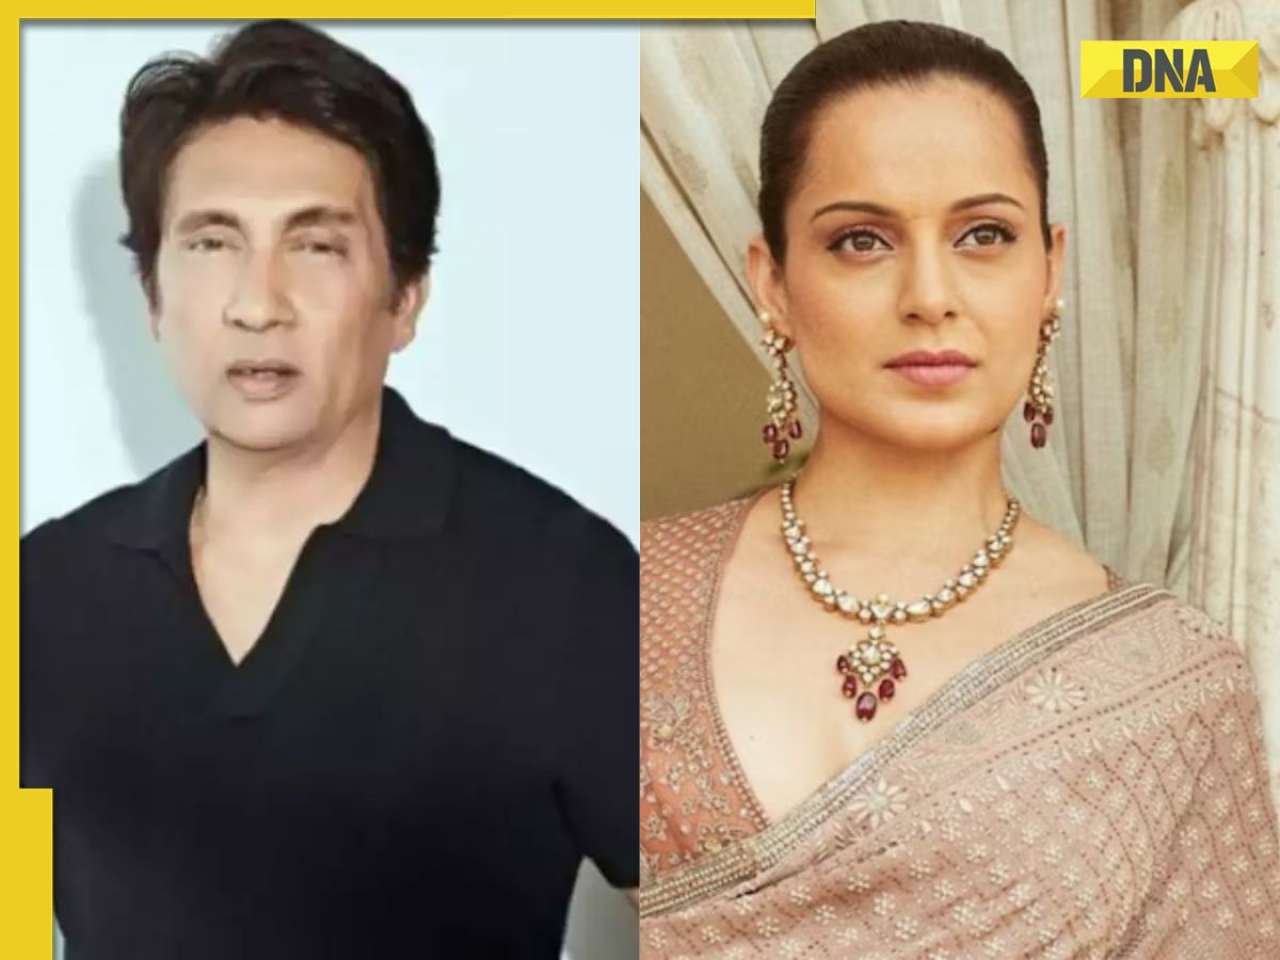 After accusing Kangana Ranaut of doing black magic on Adhyayan, Shekhar Suman says 'there is no ill will' against her